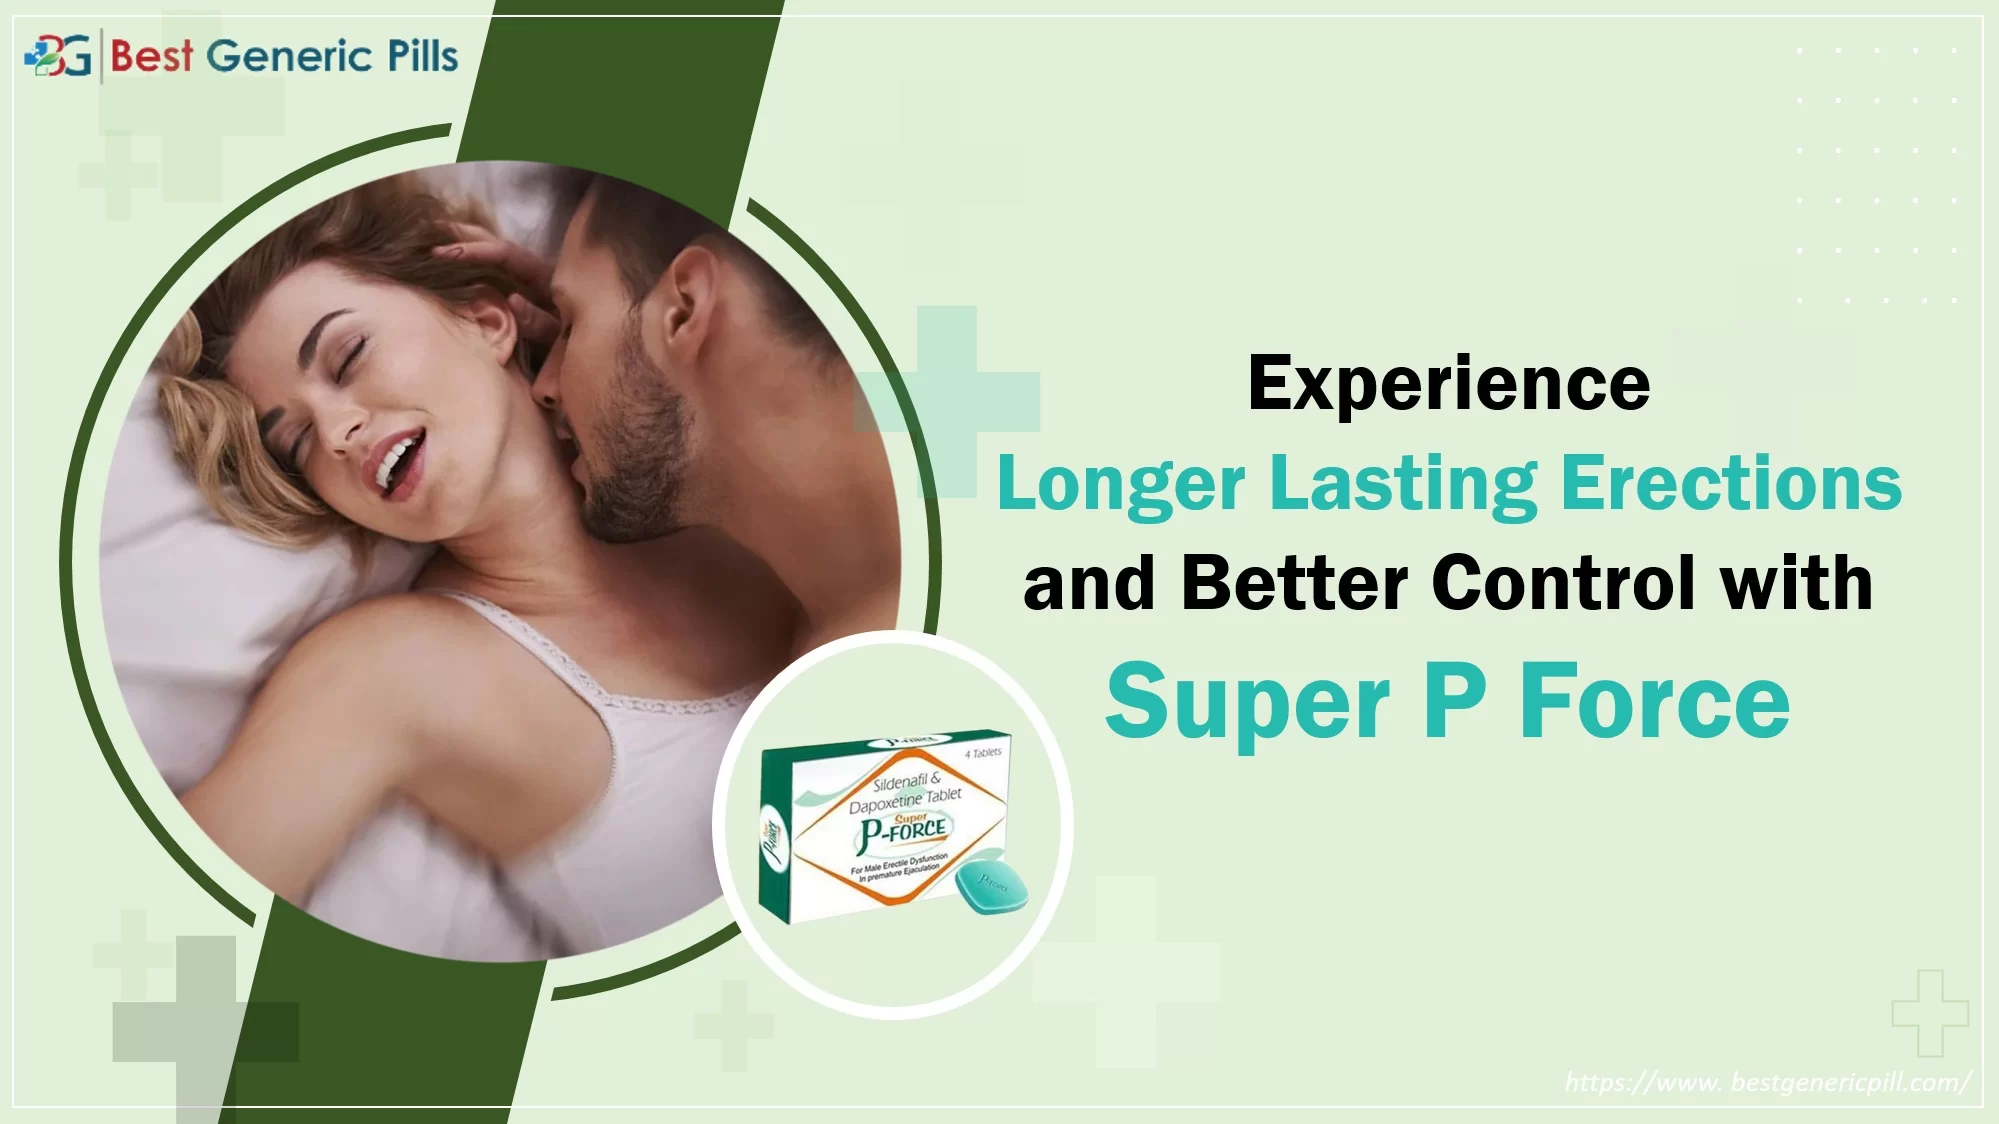 Experience Longer Lasting Erections and Better Control with Super P Force